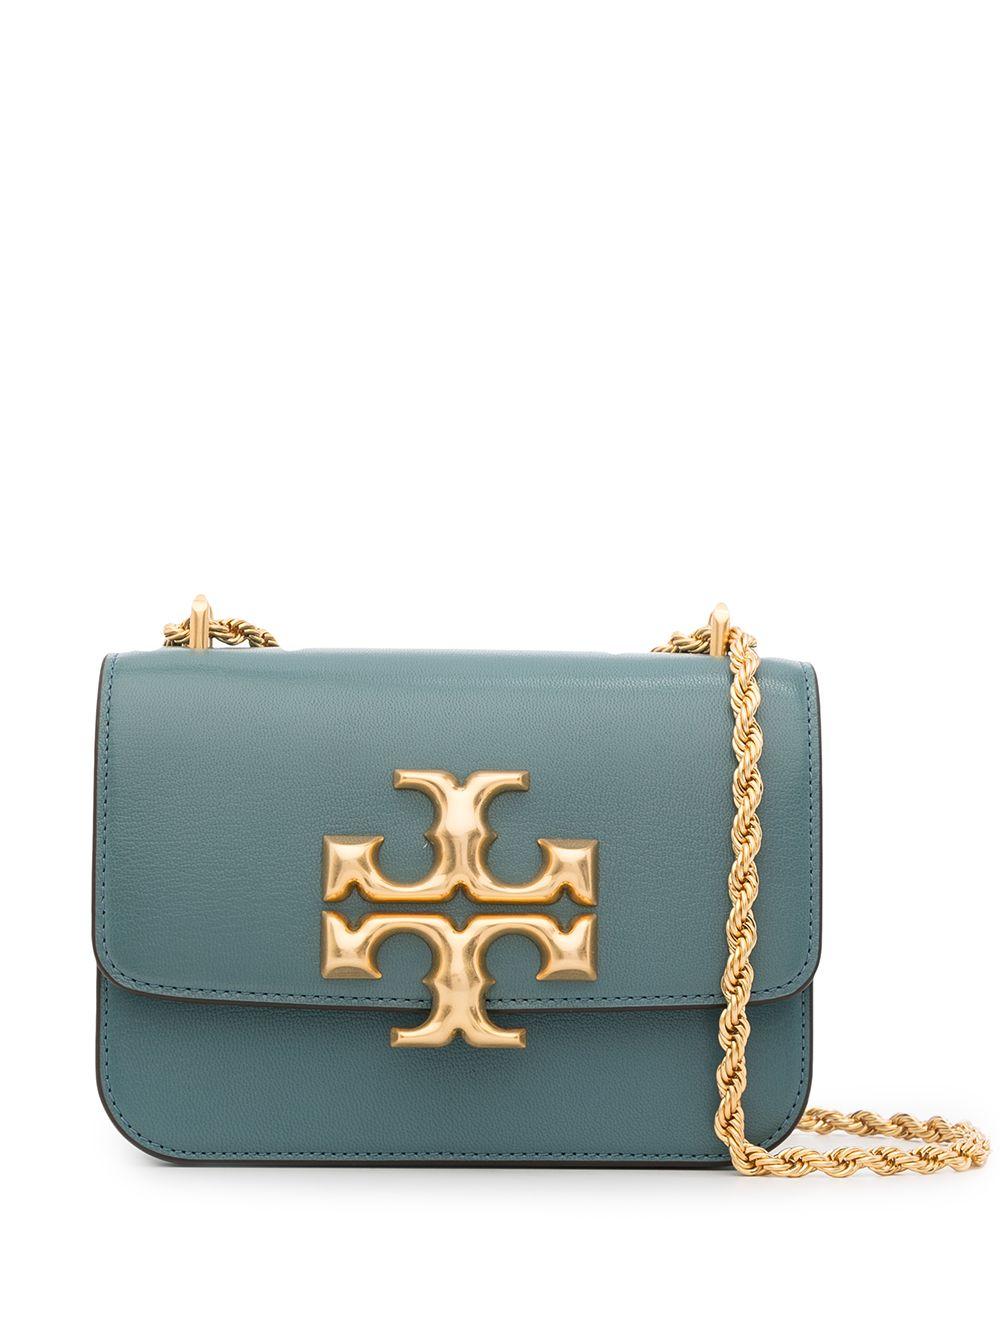 Tory Burch Eleanor Small Bag in Blue | Lyst